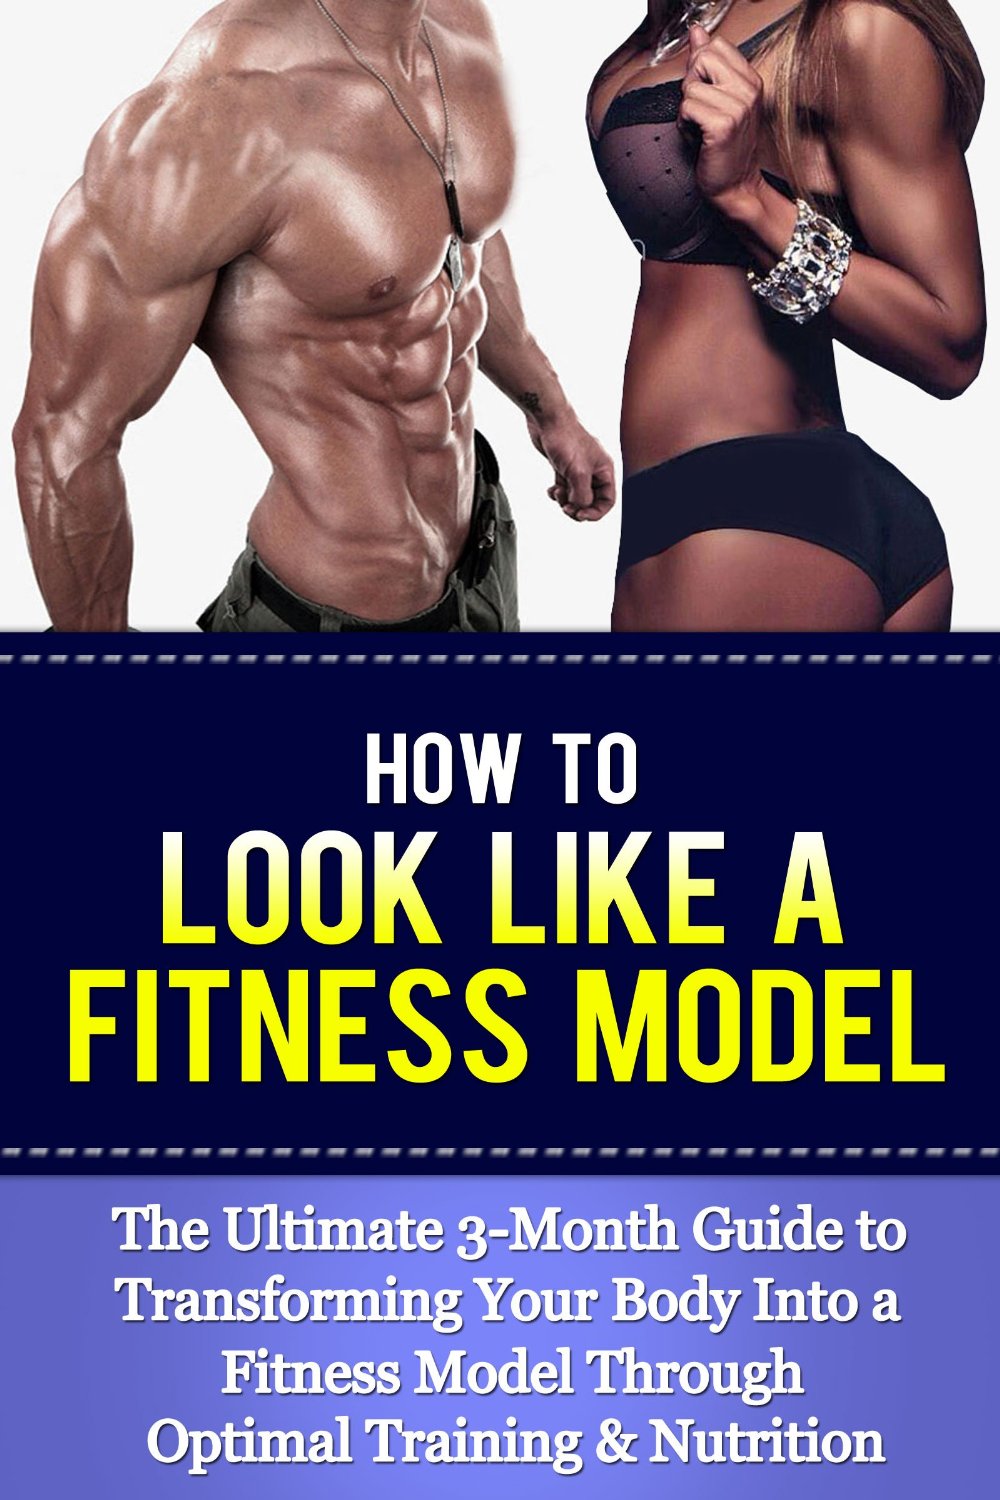 How to Look Like a Fitness Model: The Ultimate 3-Month Guide to Transforming Your Body Into a Fitness Model Through Optimal Training & Nutrition by Terry Jones